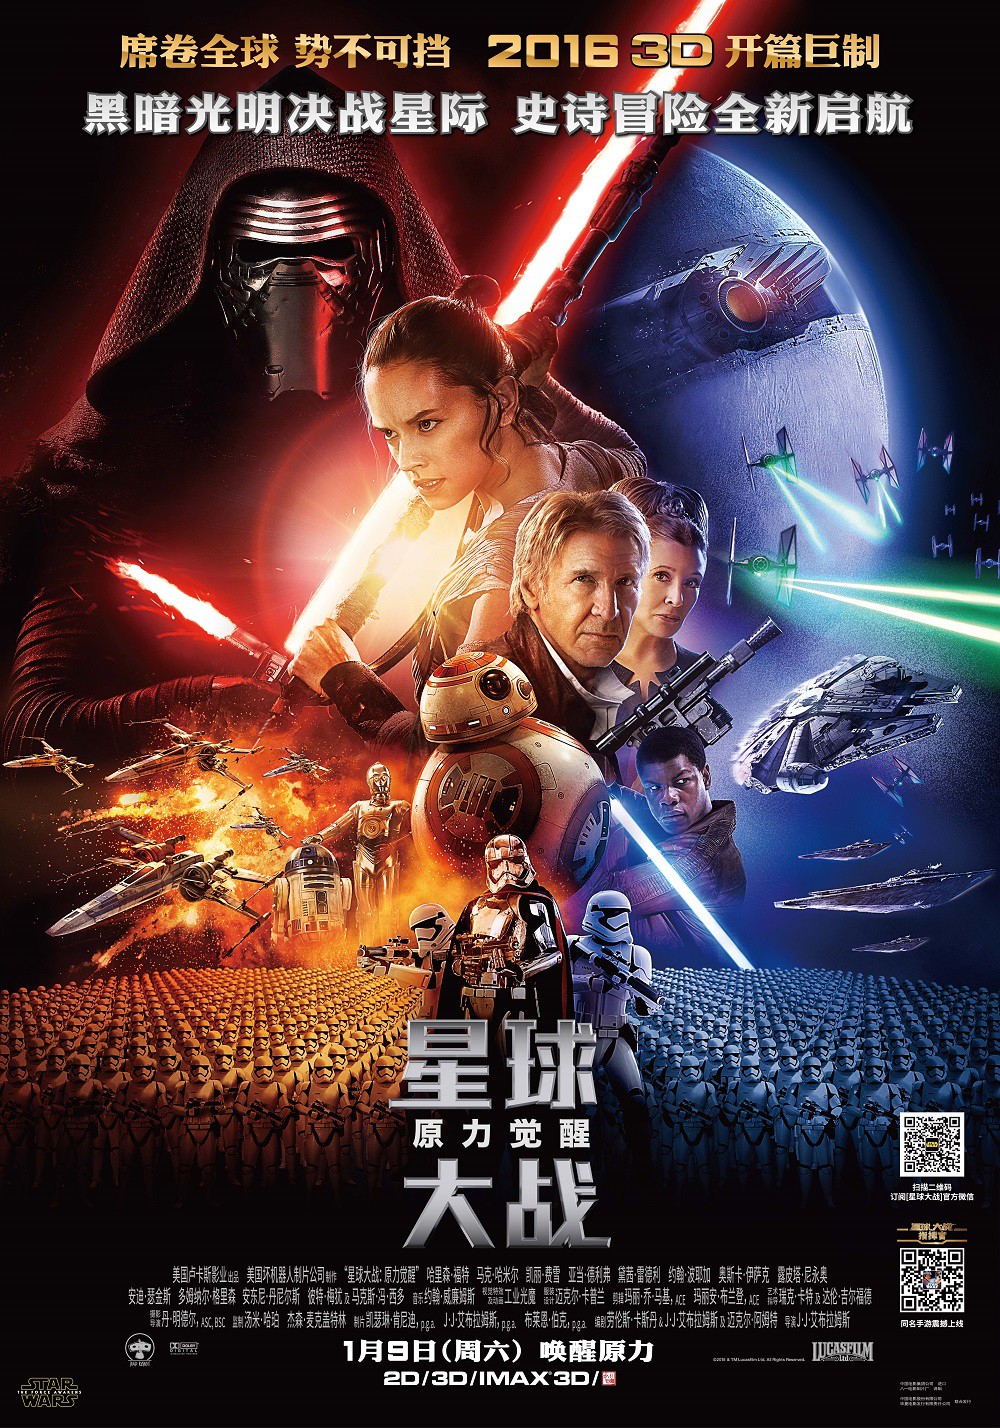 Extra Large Movie Poster Image for Star Wars: The Force Awakens (#16 of 29)